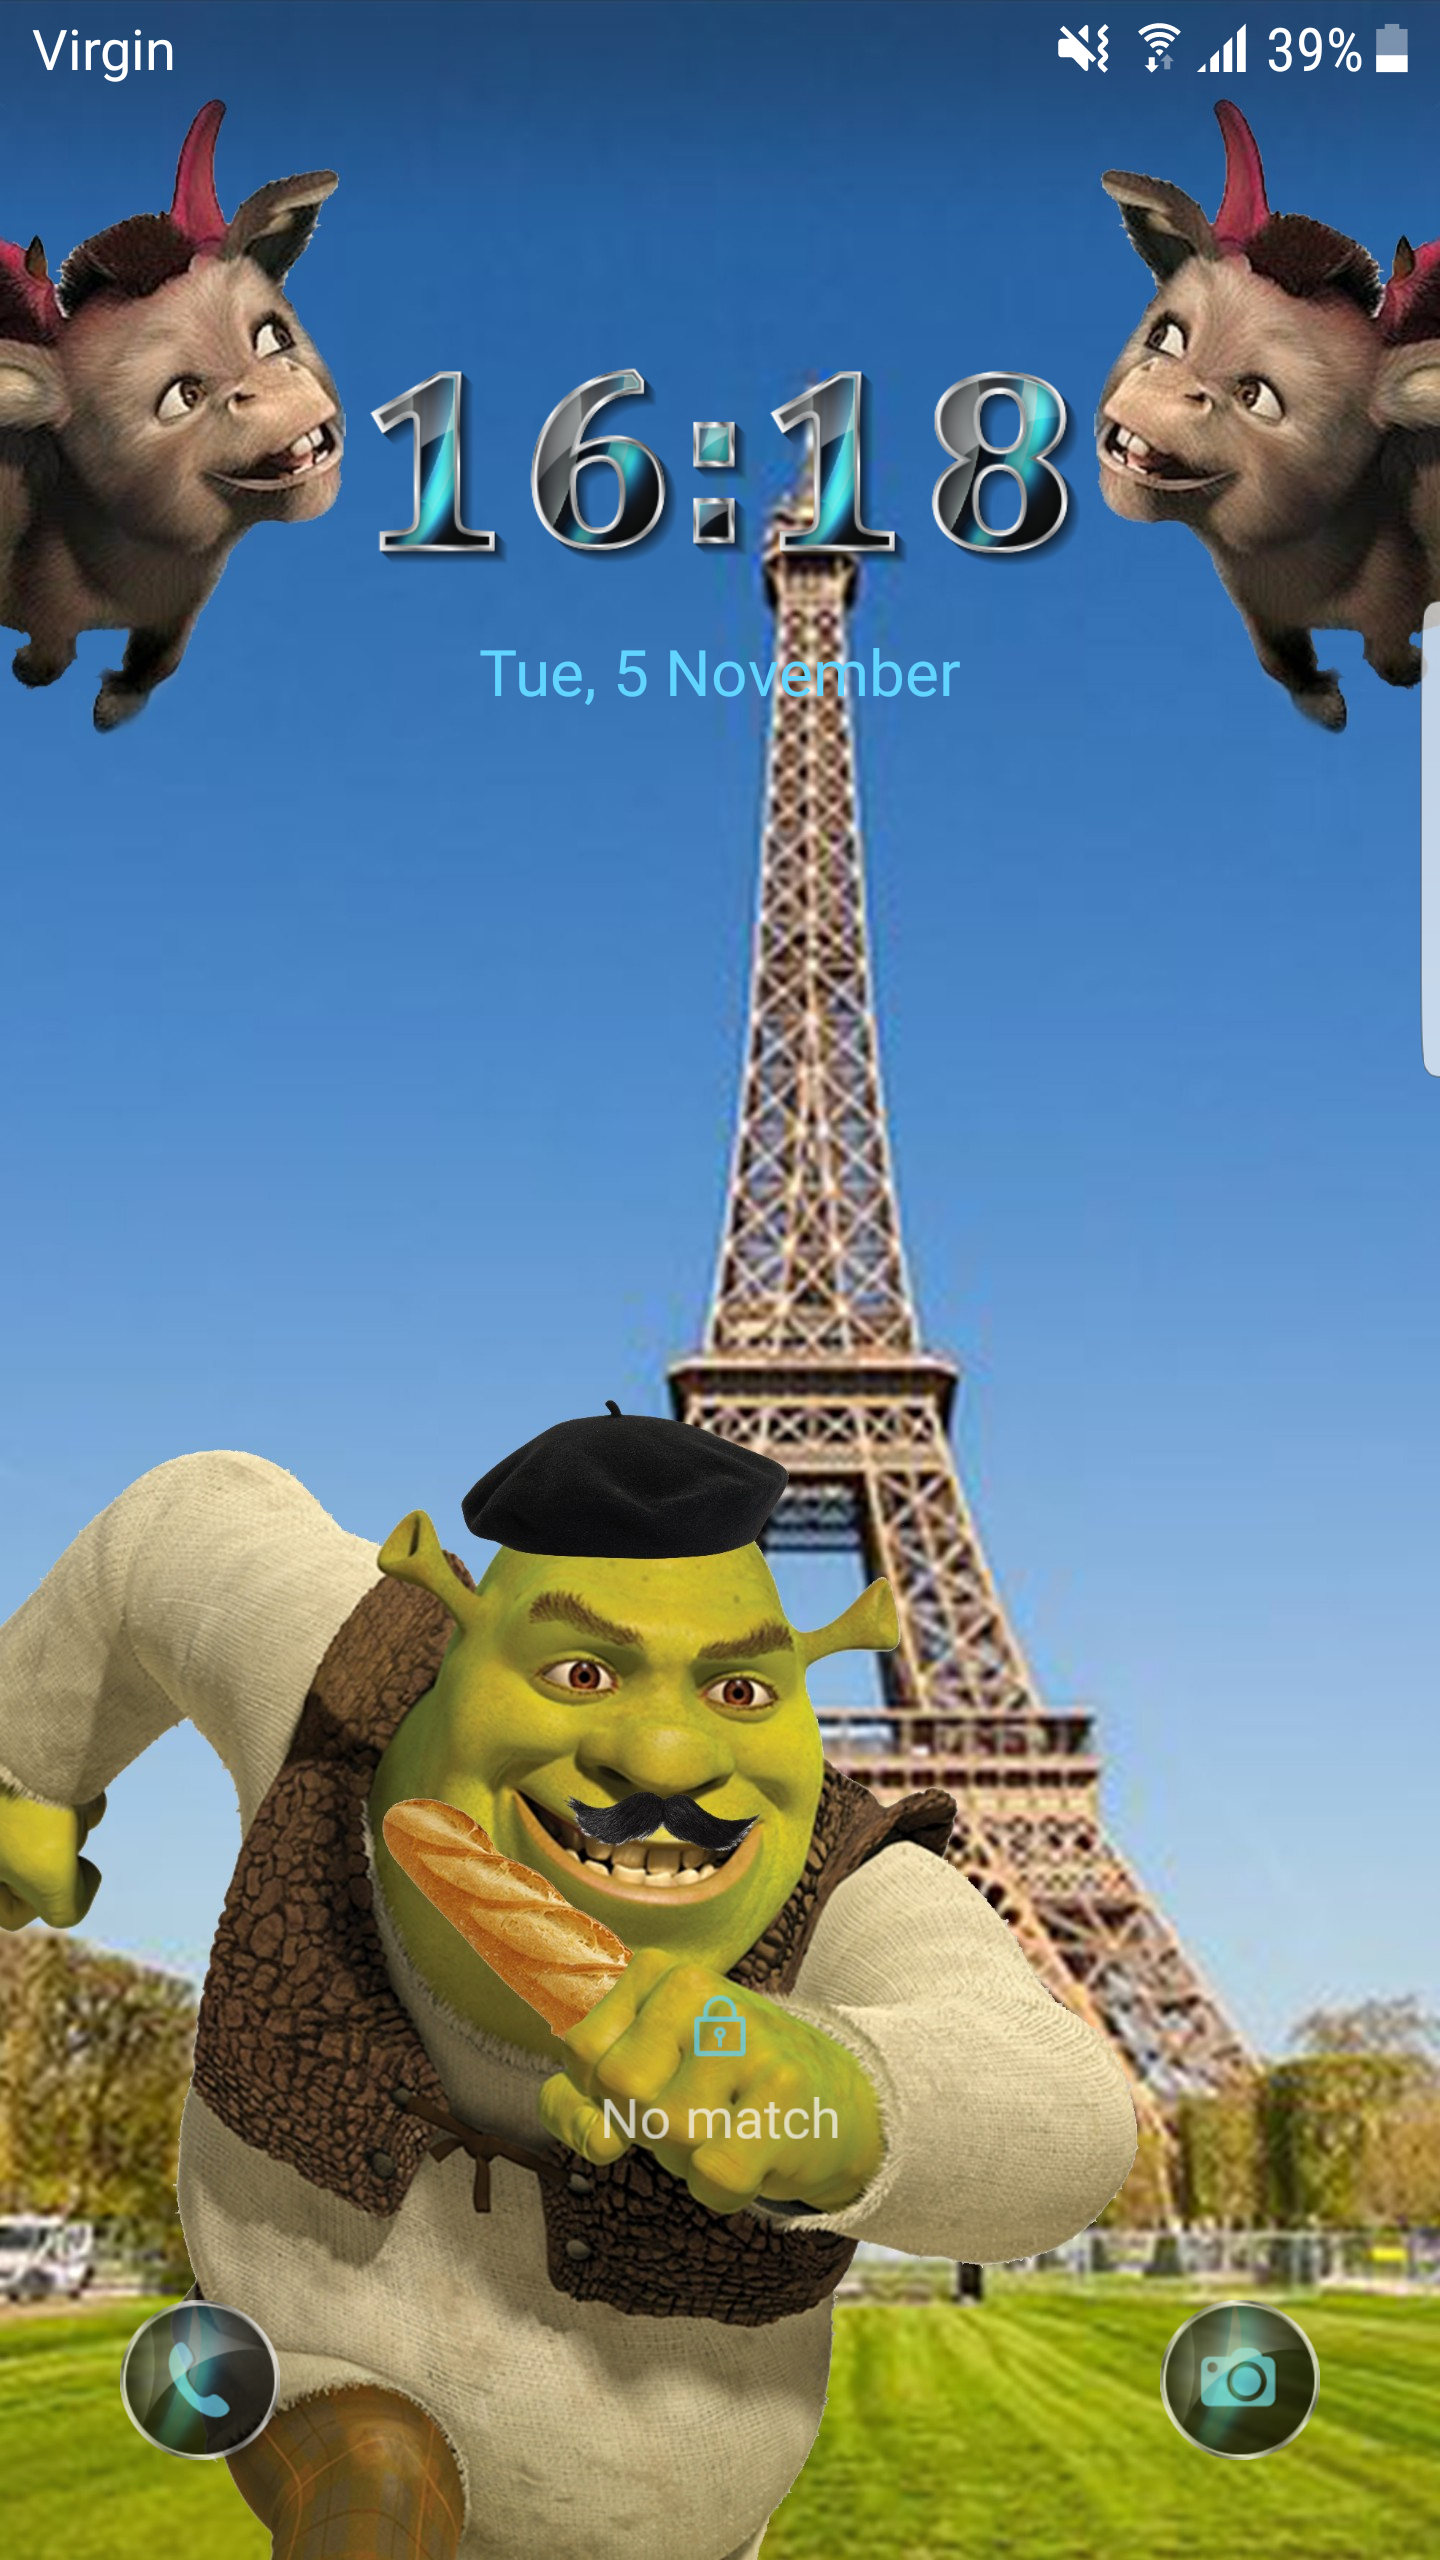 I just made a wallpaper for my phone and I love it rShrek